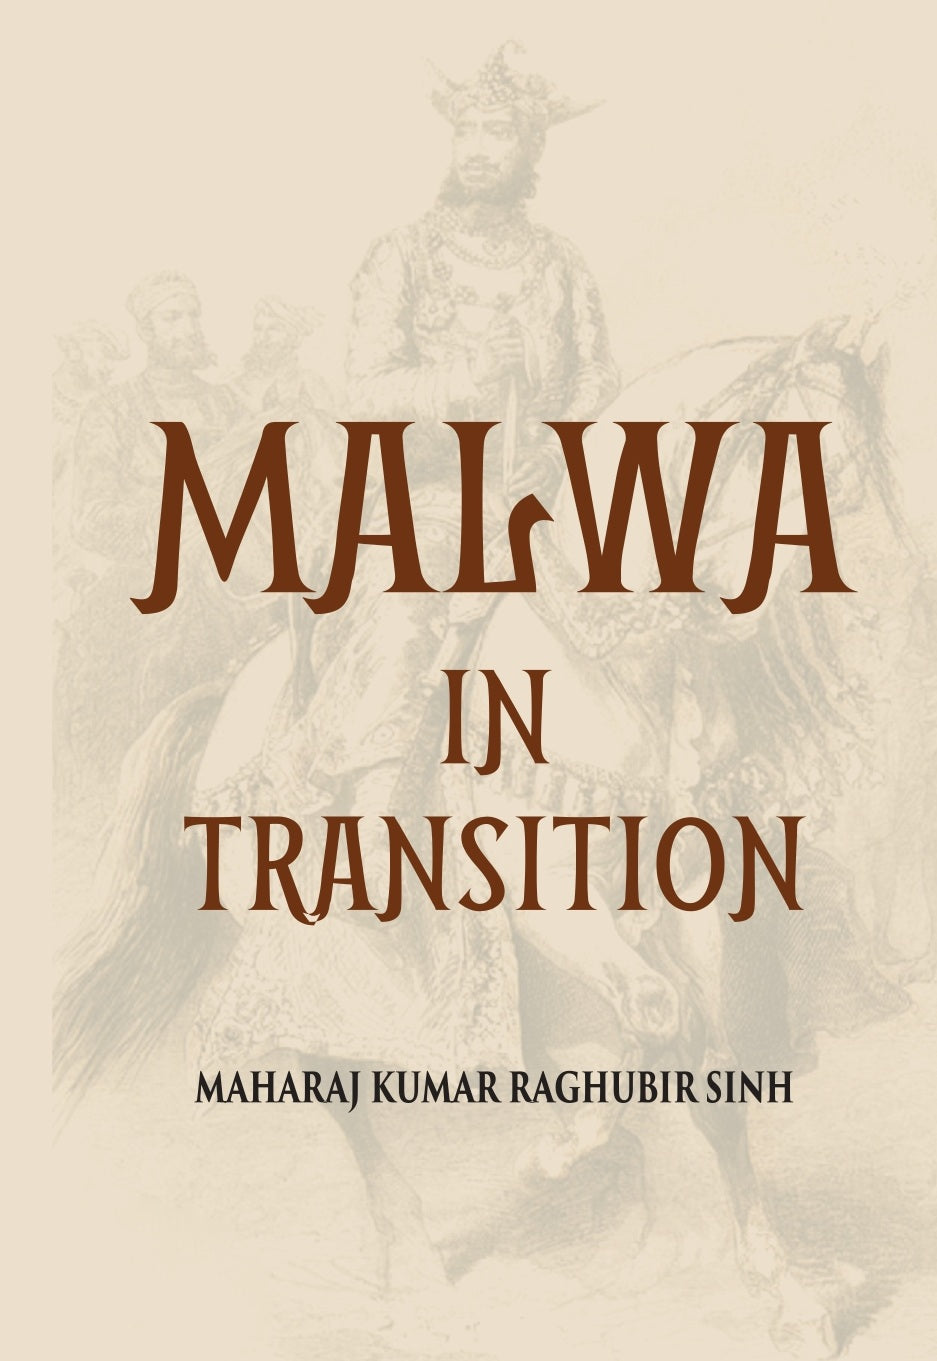 Malwa In Transition Or A Century Of Anarchy The First Phase 16981765